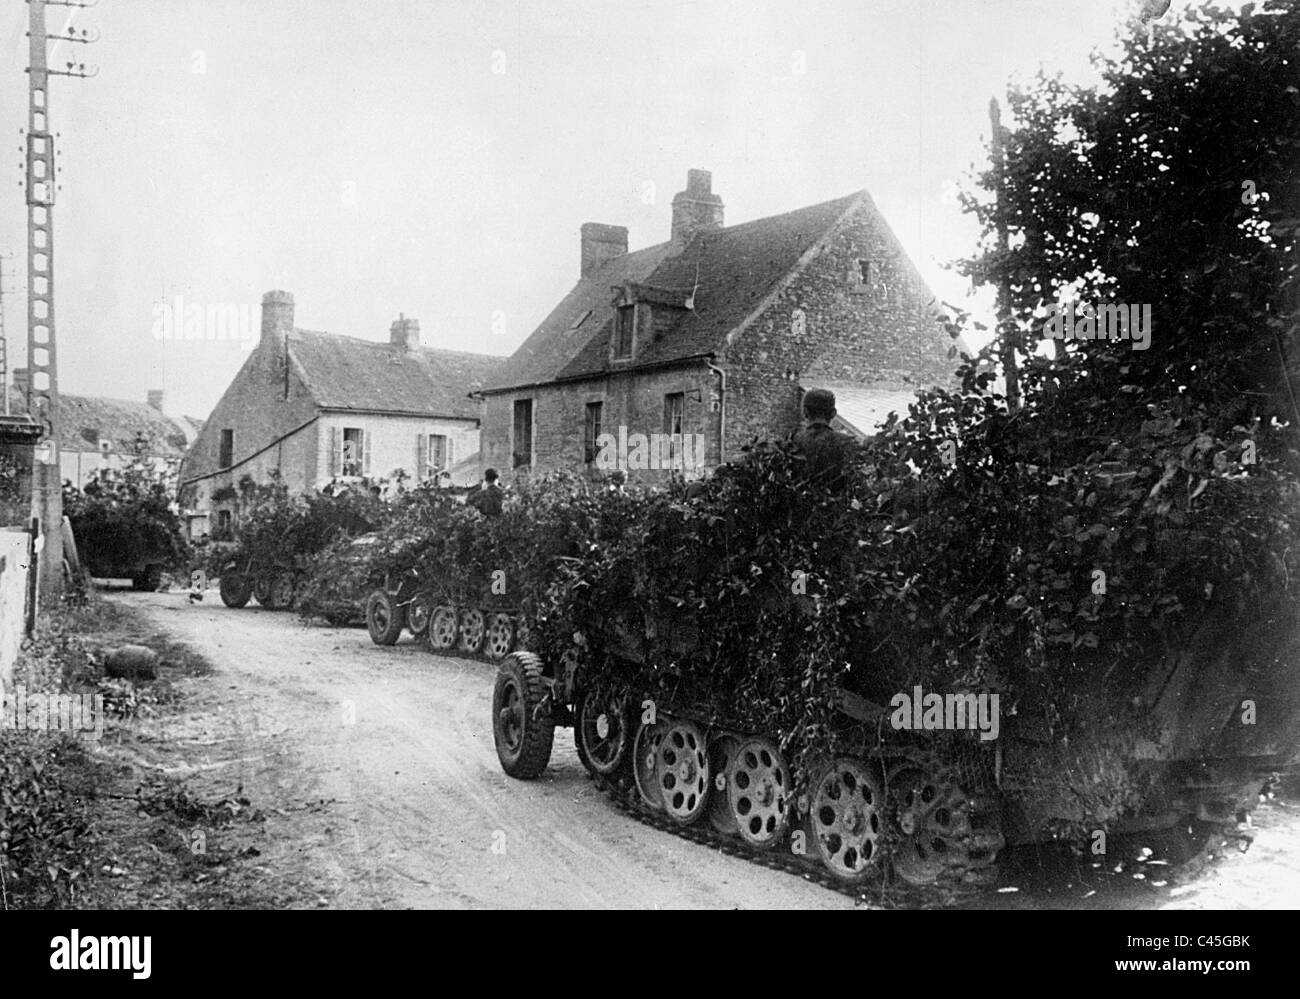 German armored vehicles in a village in France, 1944 Stock Photo